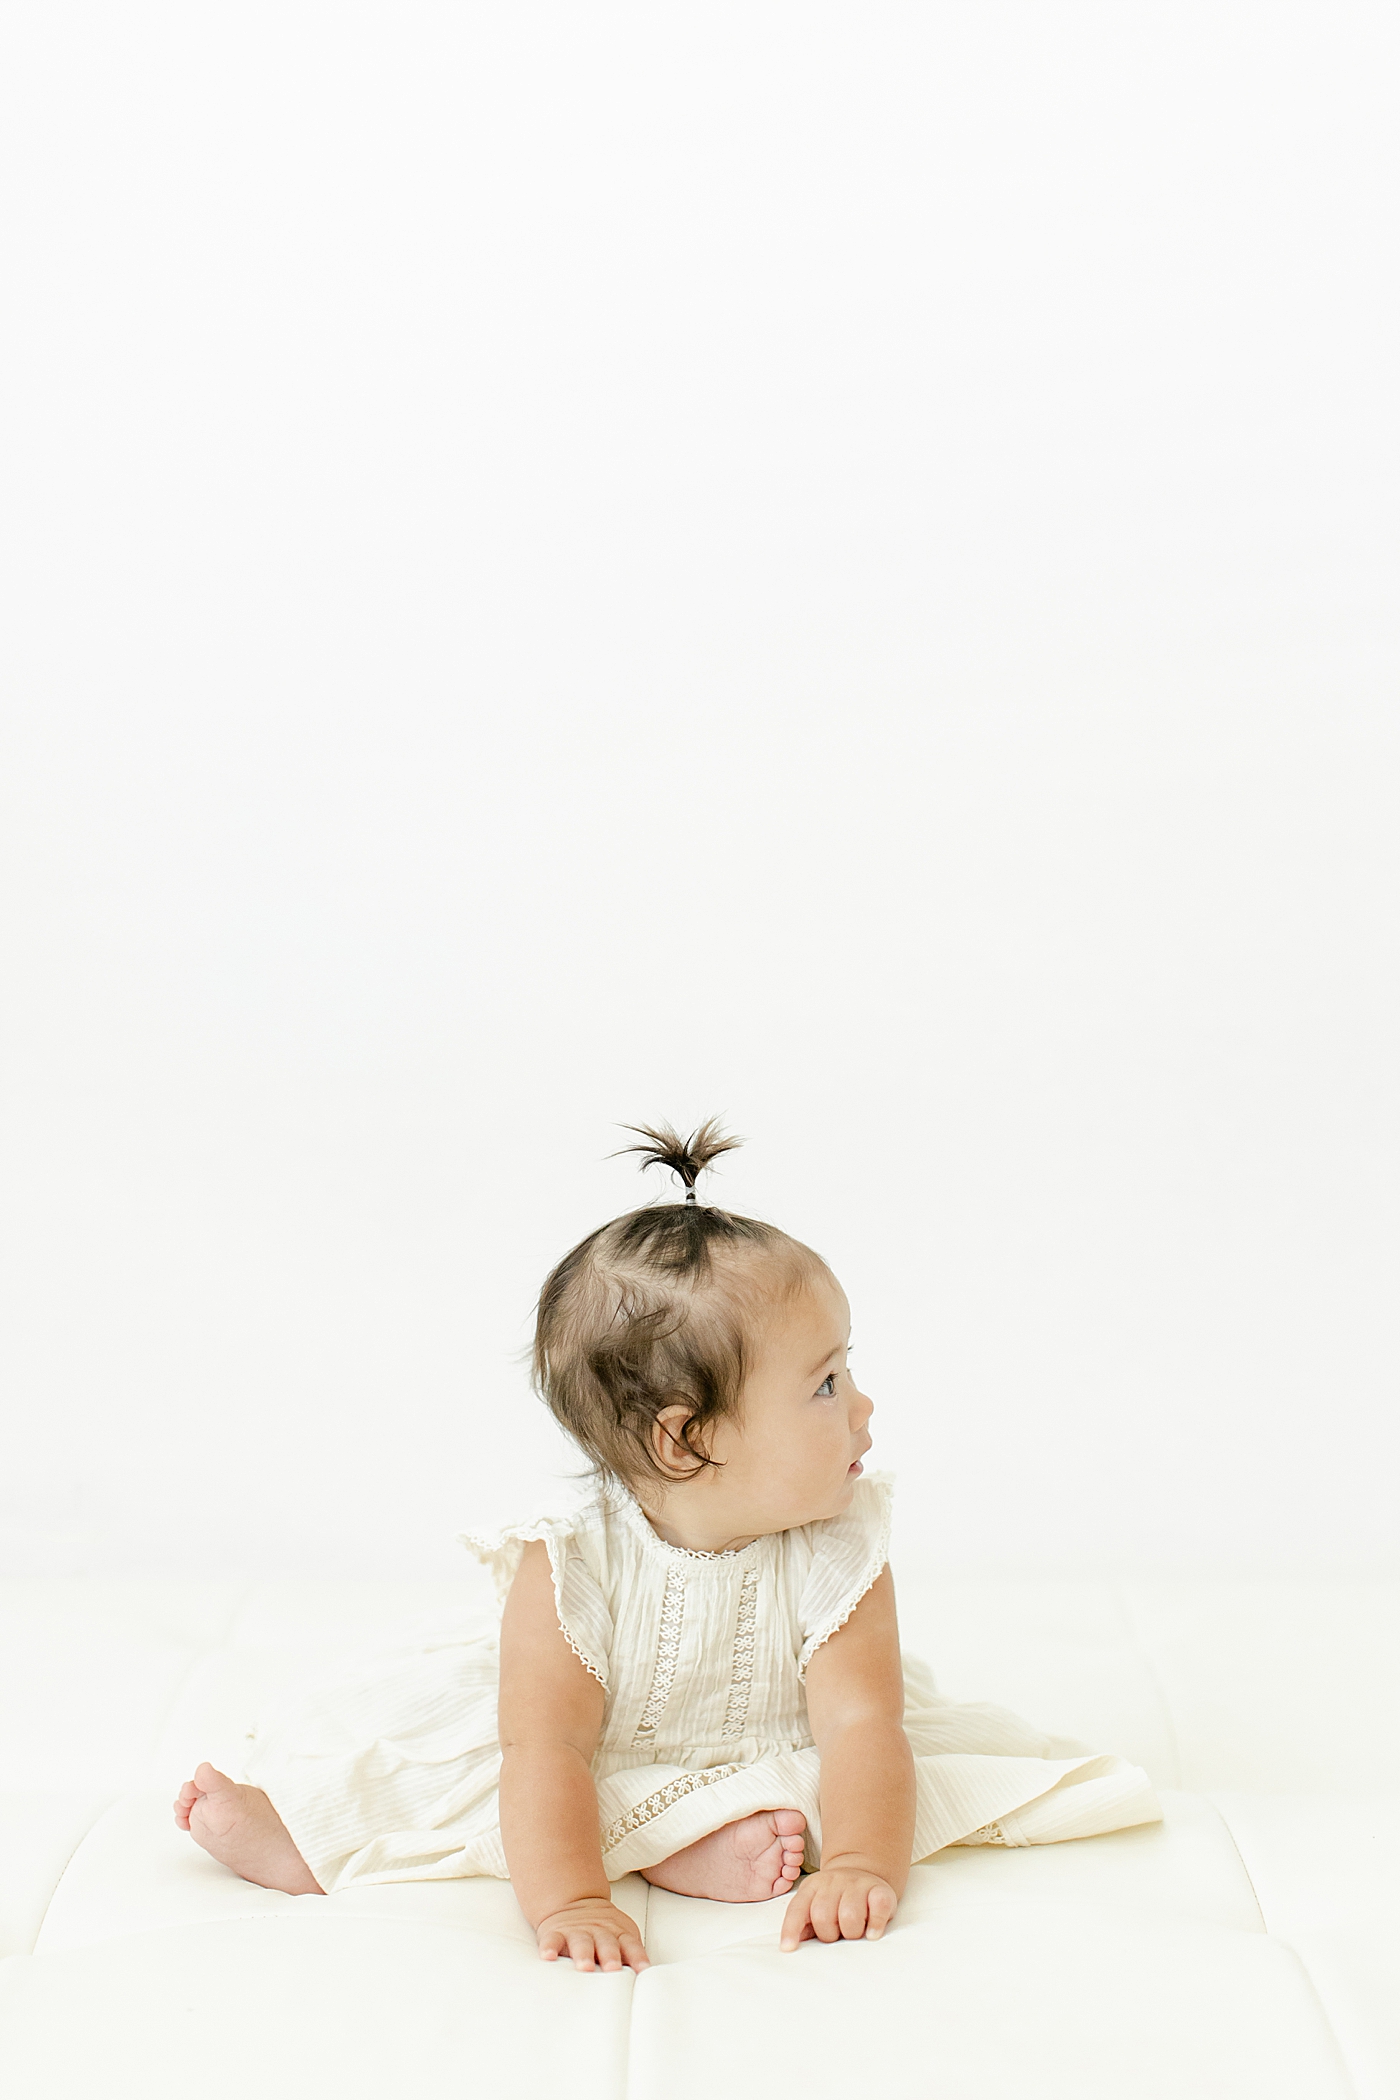 Baby girl sitting up wearing a cream dress during her Six Month Studio Session | Image by Chrissy Winchester Photography